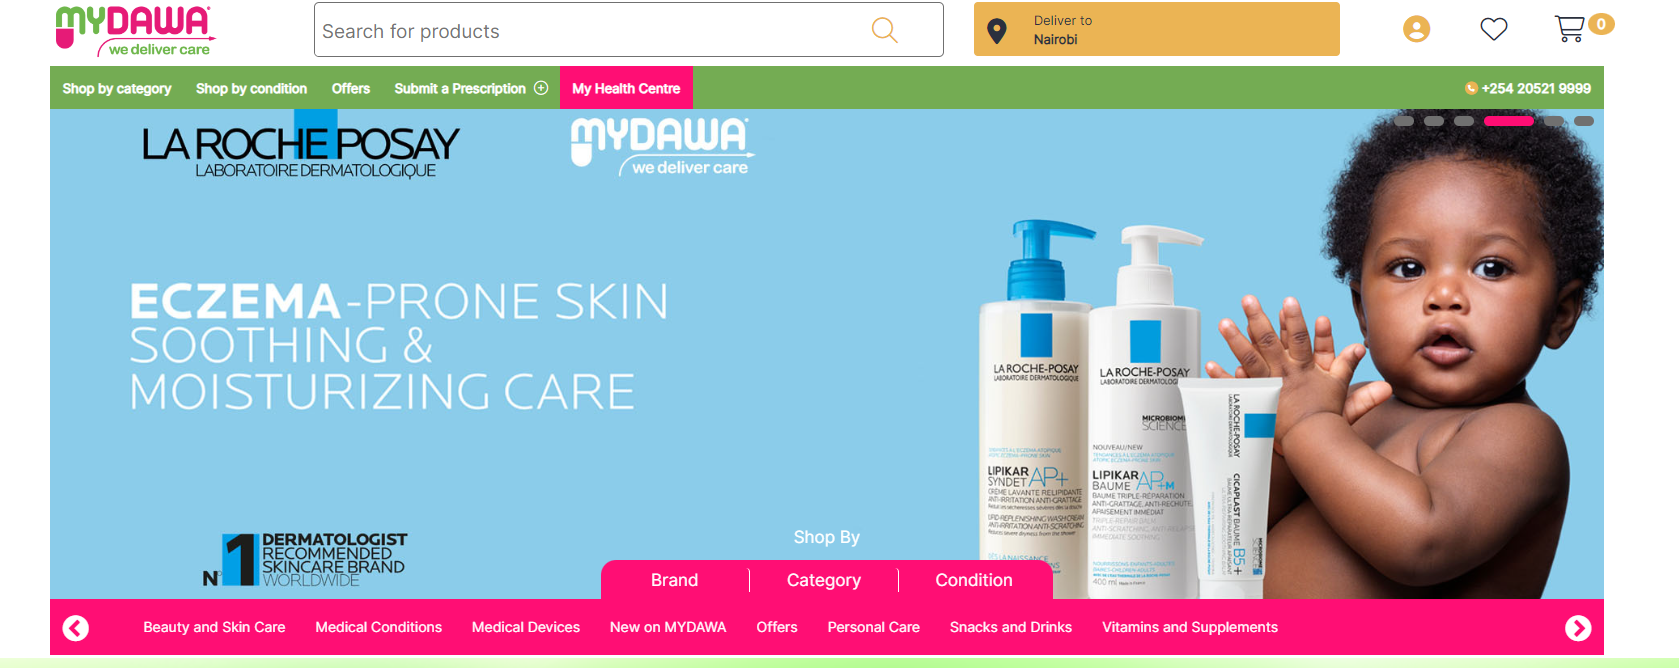 With an impressive $29M raised, MYDAWA is on a mission to deliver quality and affordable products.